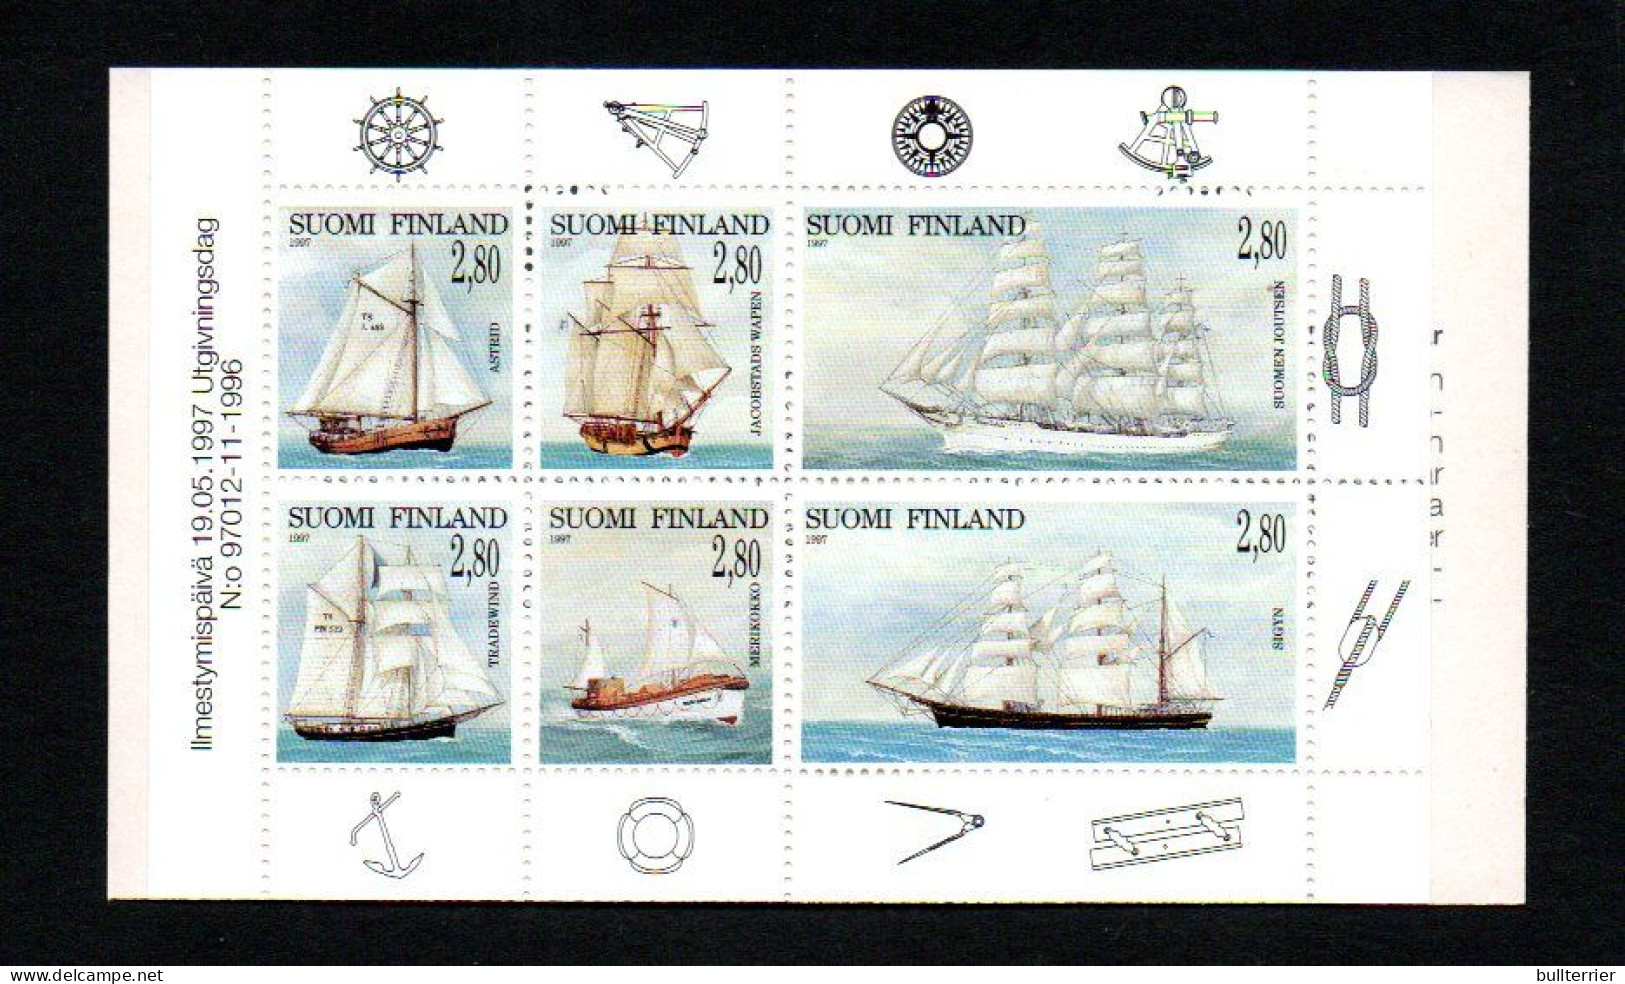 FINLAND - 1997 - Lifeboatd  Centenary Booklet Complete Mint Never Hinged, Sg Cat £21 - Markenheftchen